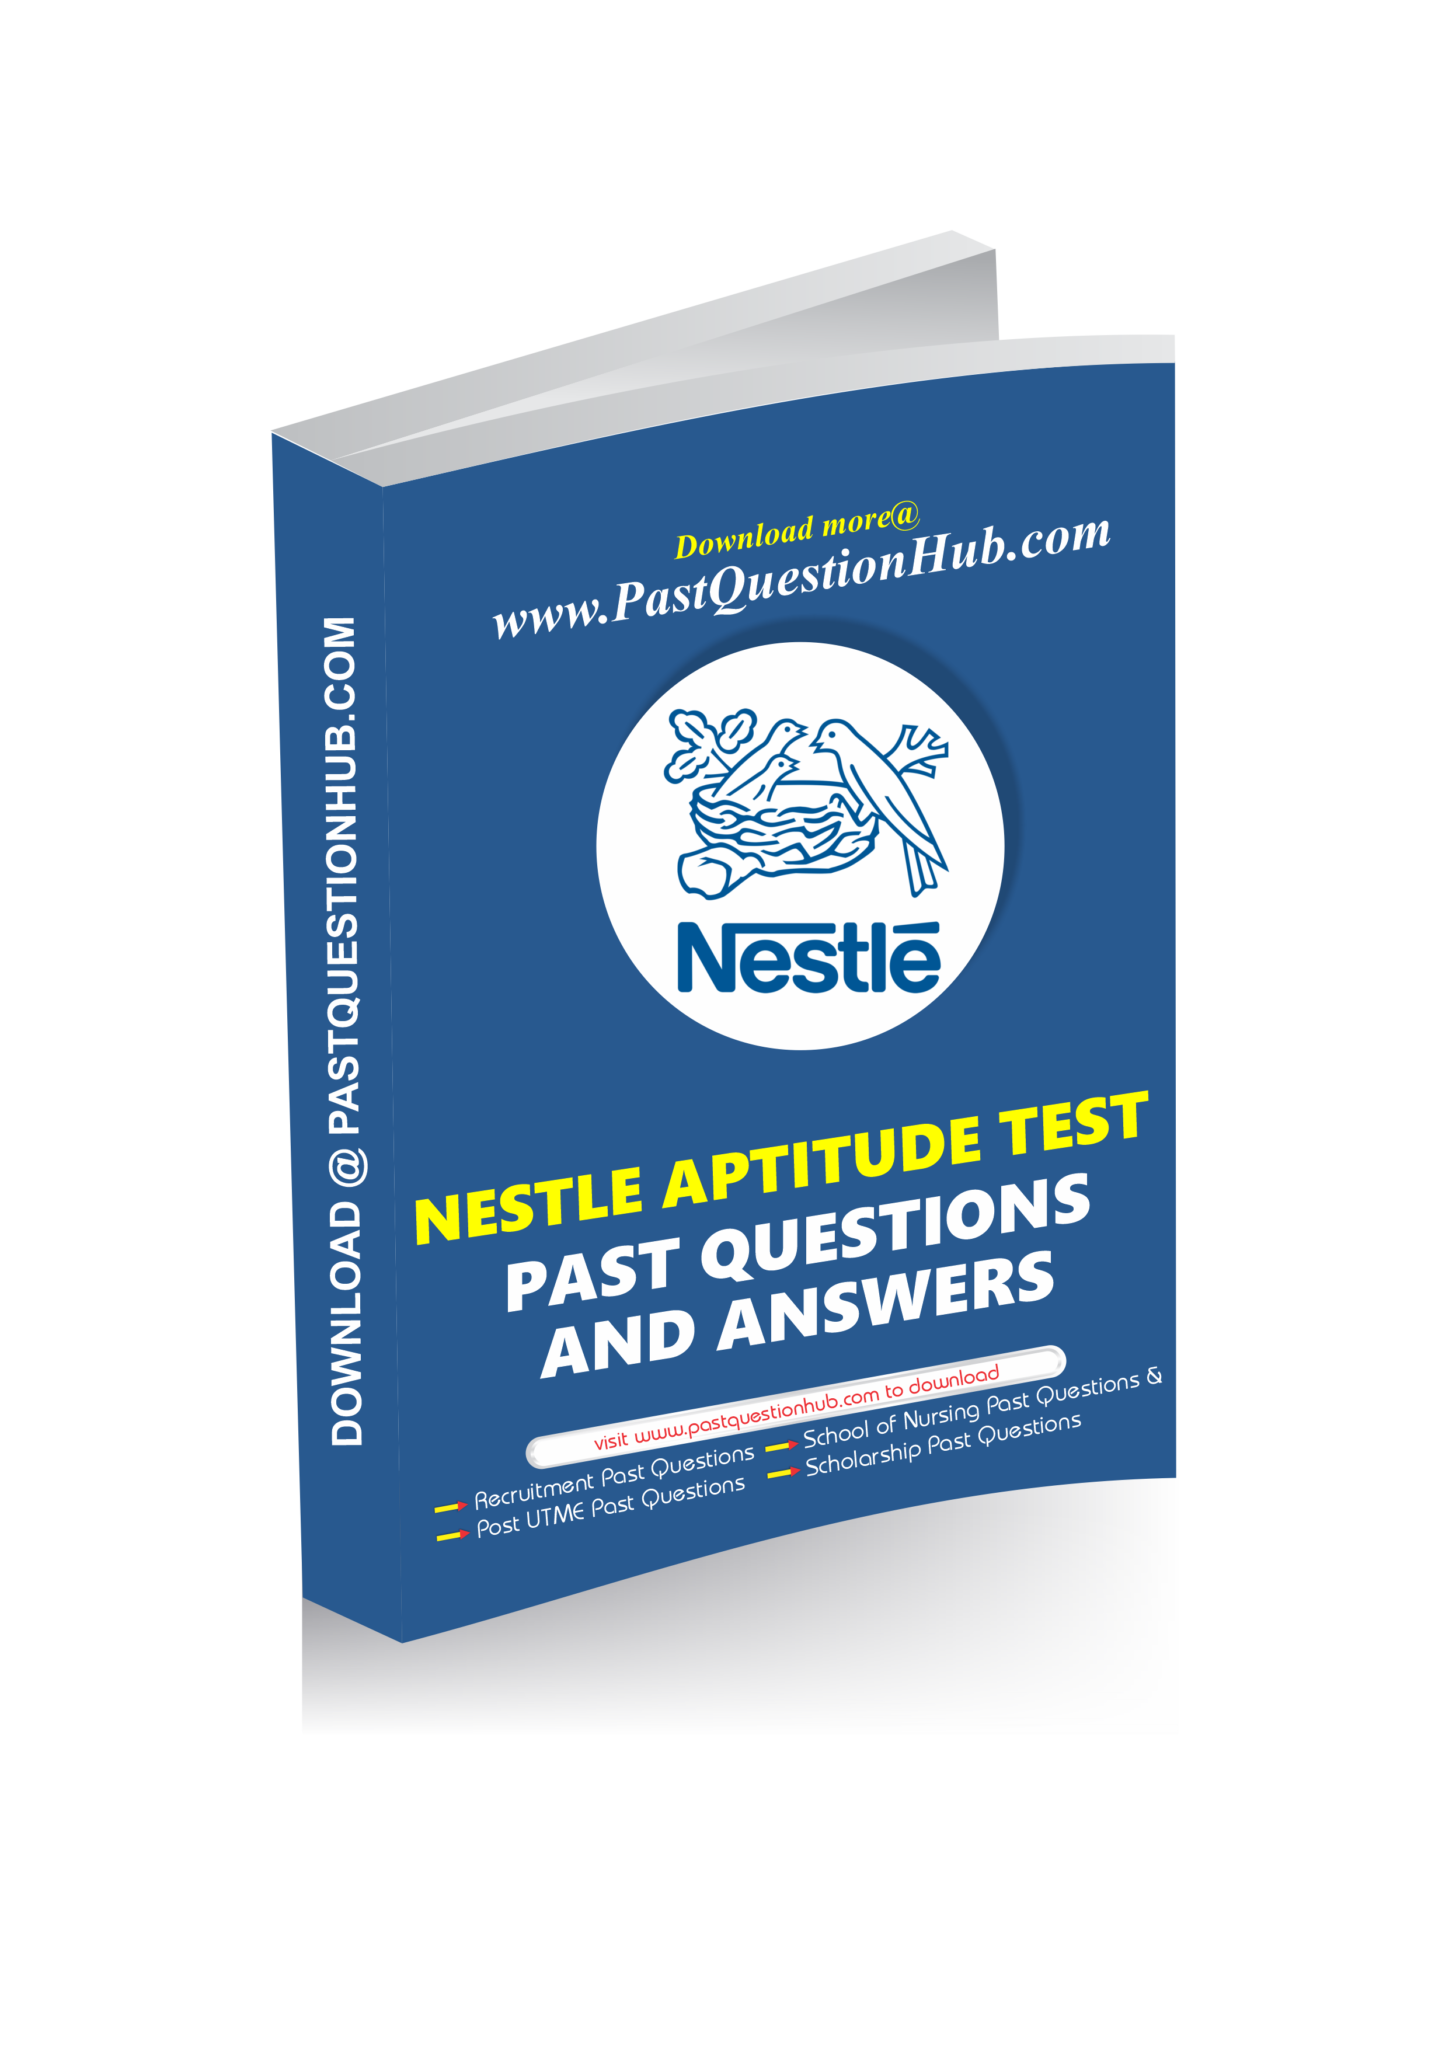 nestle-aptitude-test-past-questions-and-answers-pdf-updated